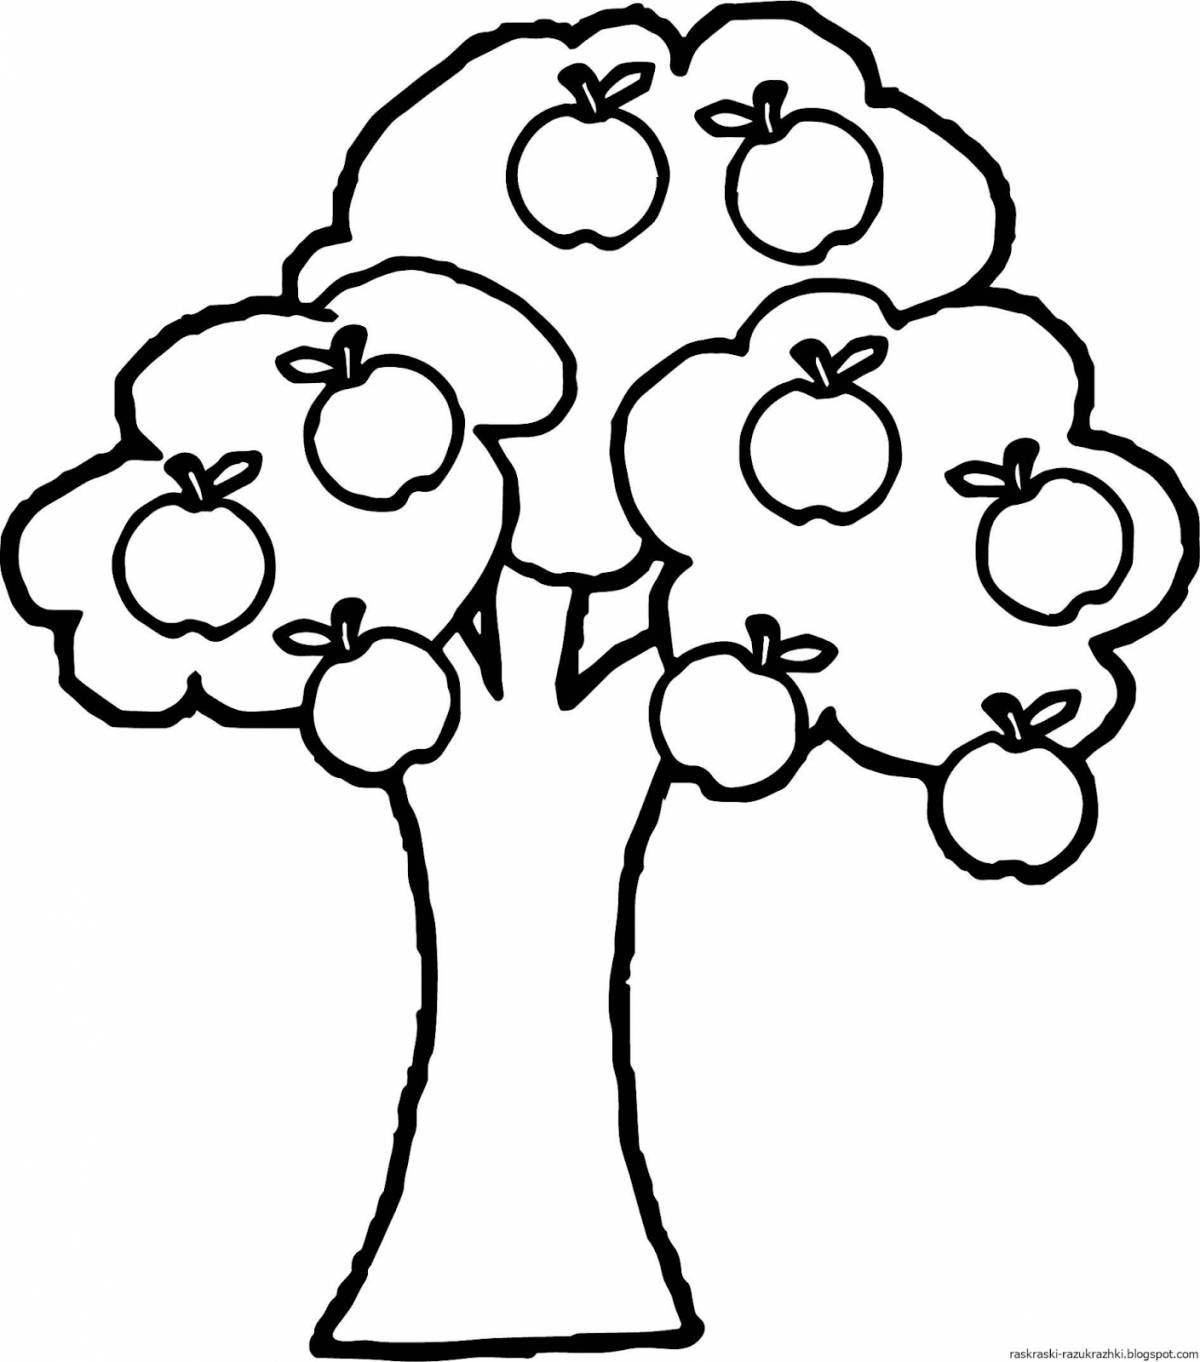 Living apple tree with apples for children